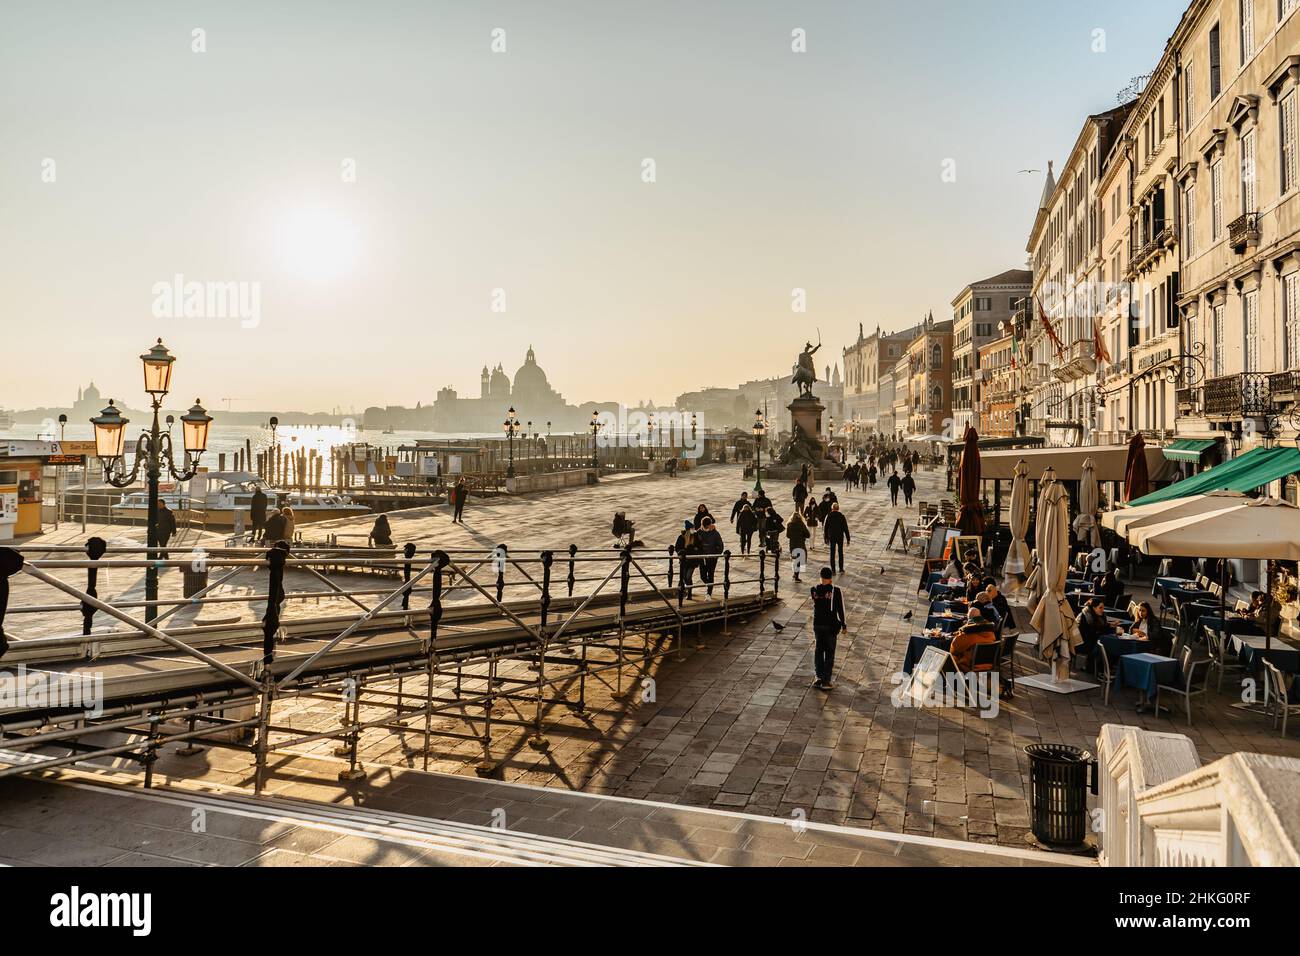 Venice,Italy-January 28,2022.People walking on embankment,tourist sitting in restaurant on sunny day,church,canal and gondolas in background.Venetian Stock Photo